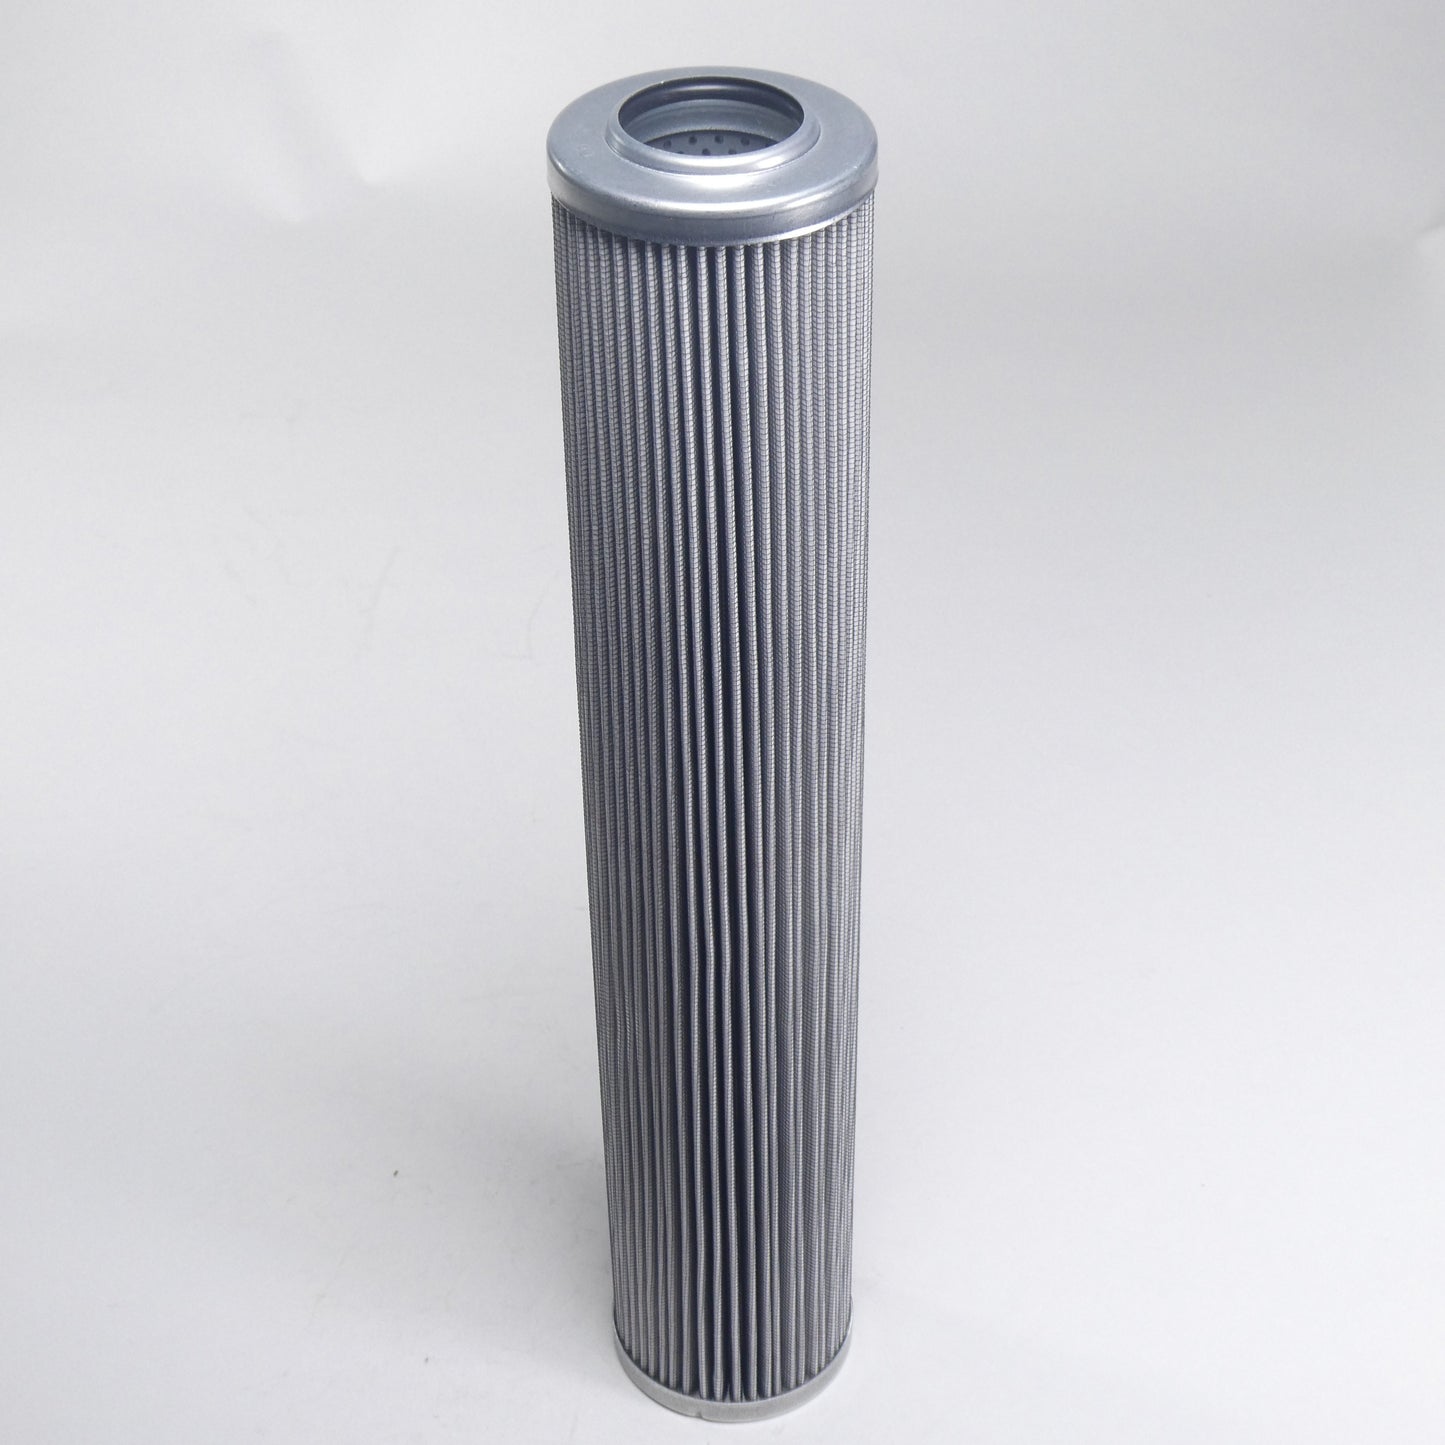 Hydrafil Replacement Filter Element for Hilco 3830-16-003-C